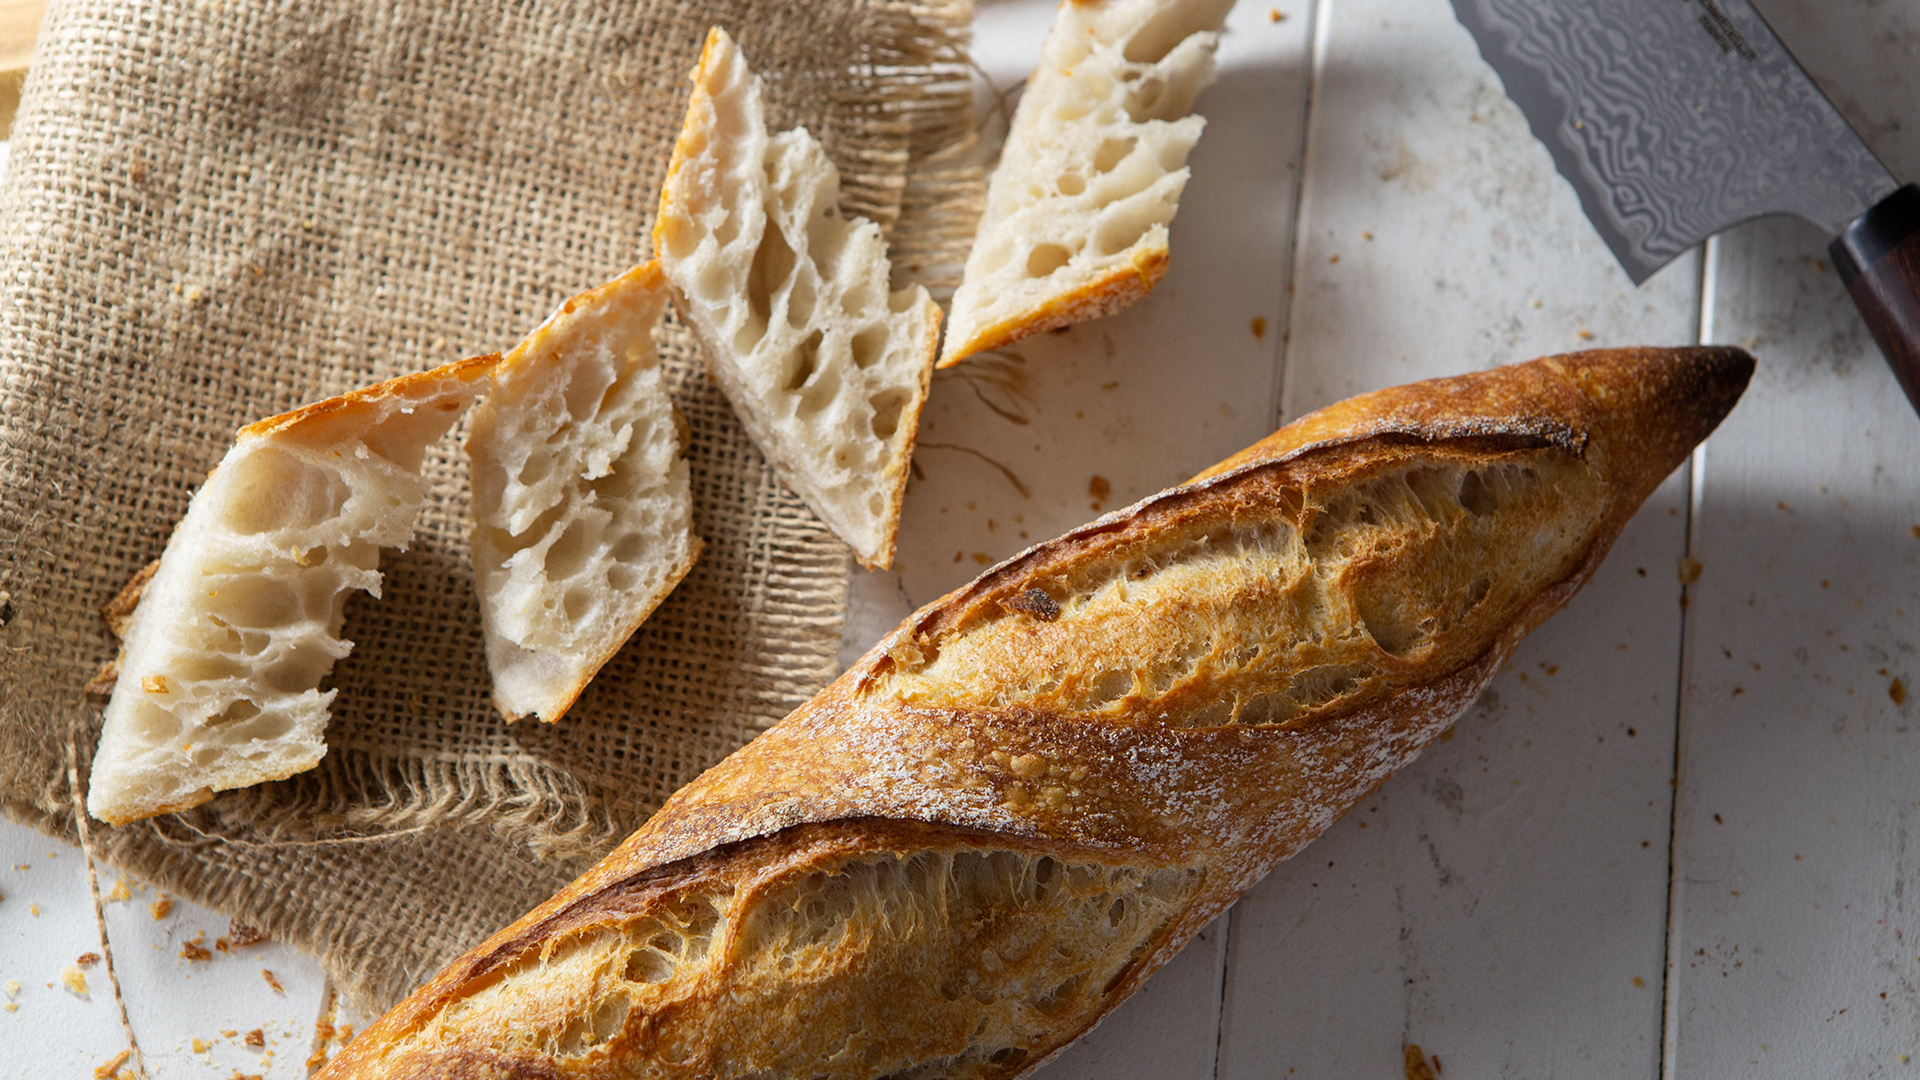 Baguette: Among the most popular types of bread in French cuisine. 1920x1080 Full HD Wallpaper.